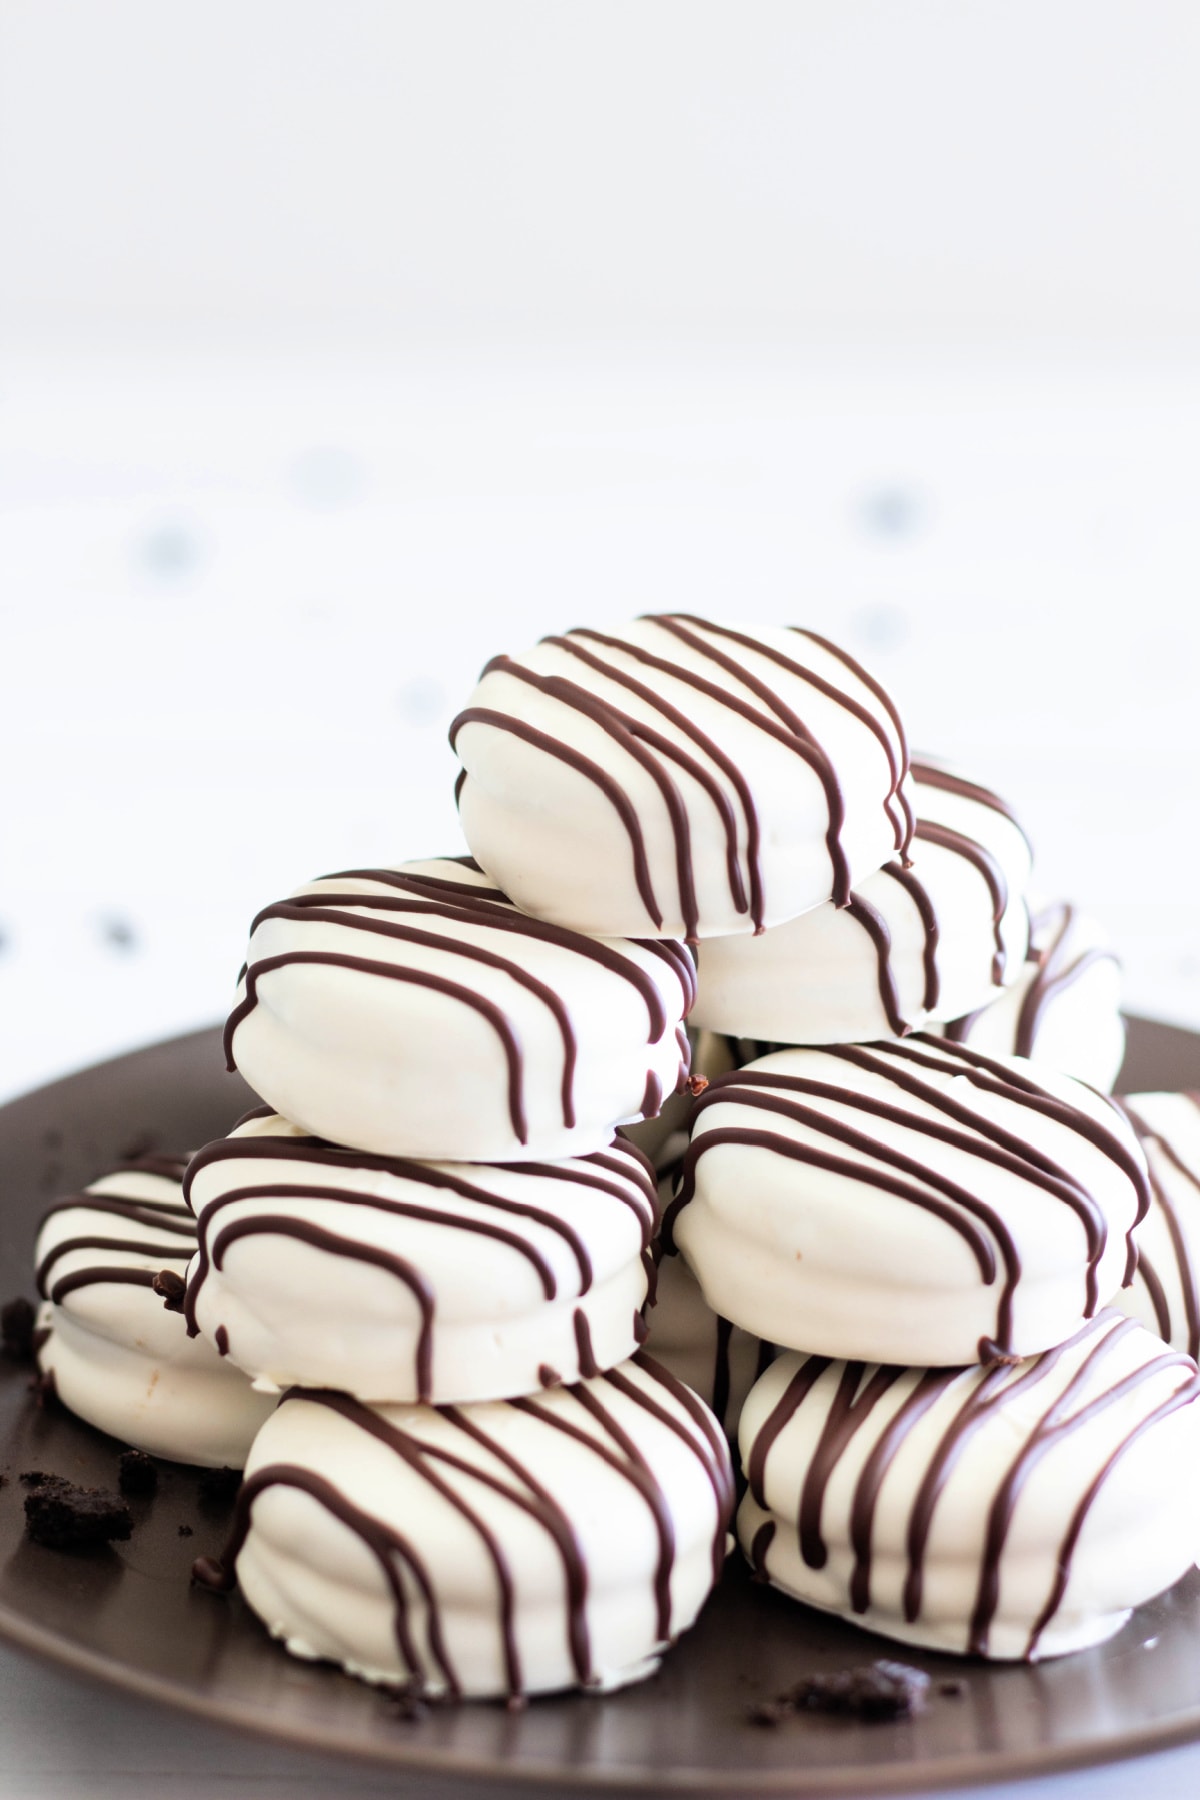 White chocolate covered Oreo cookies stacked on plate